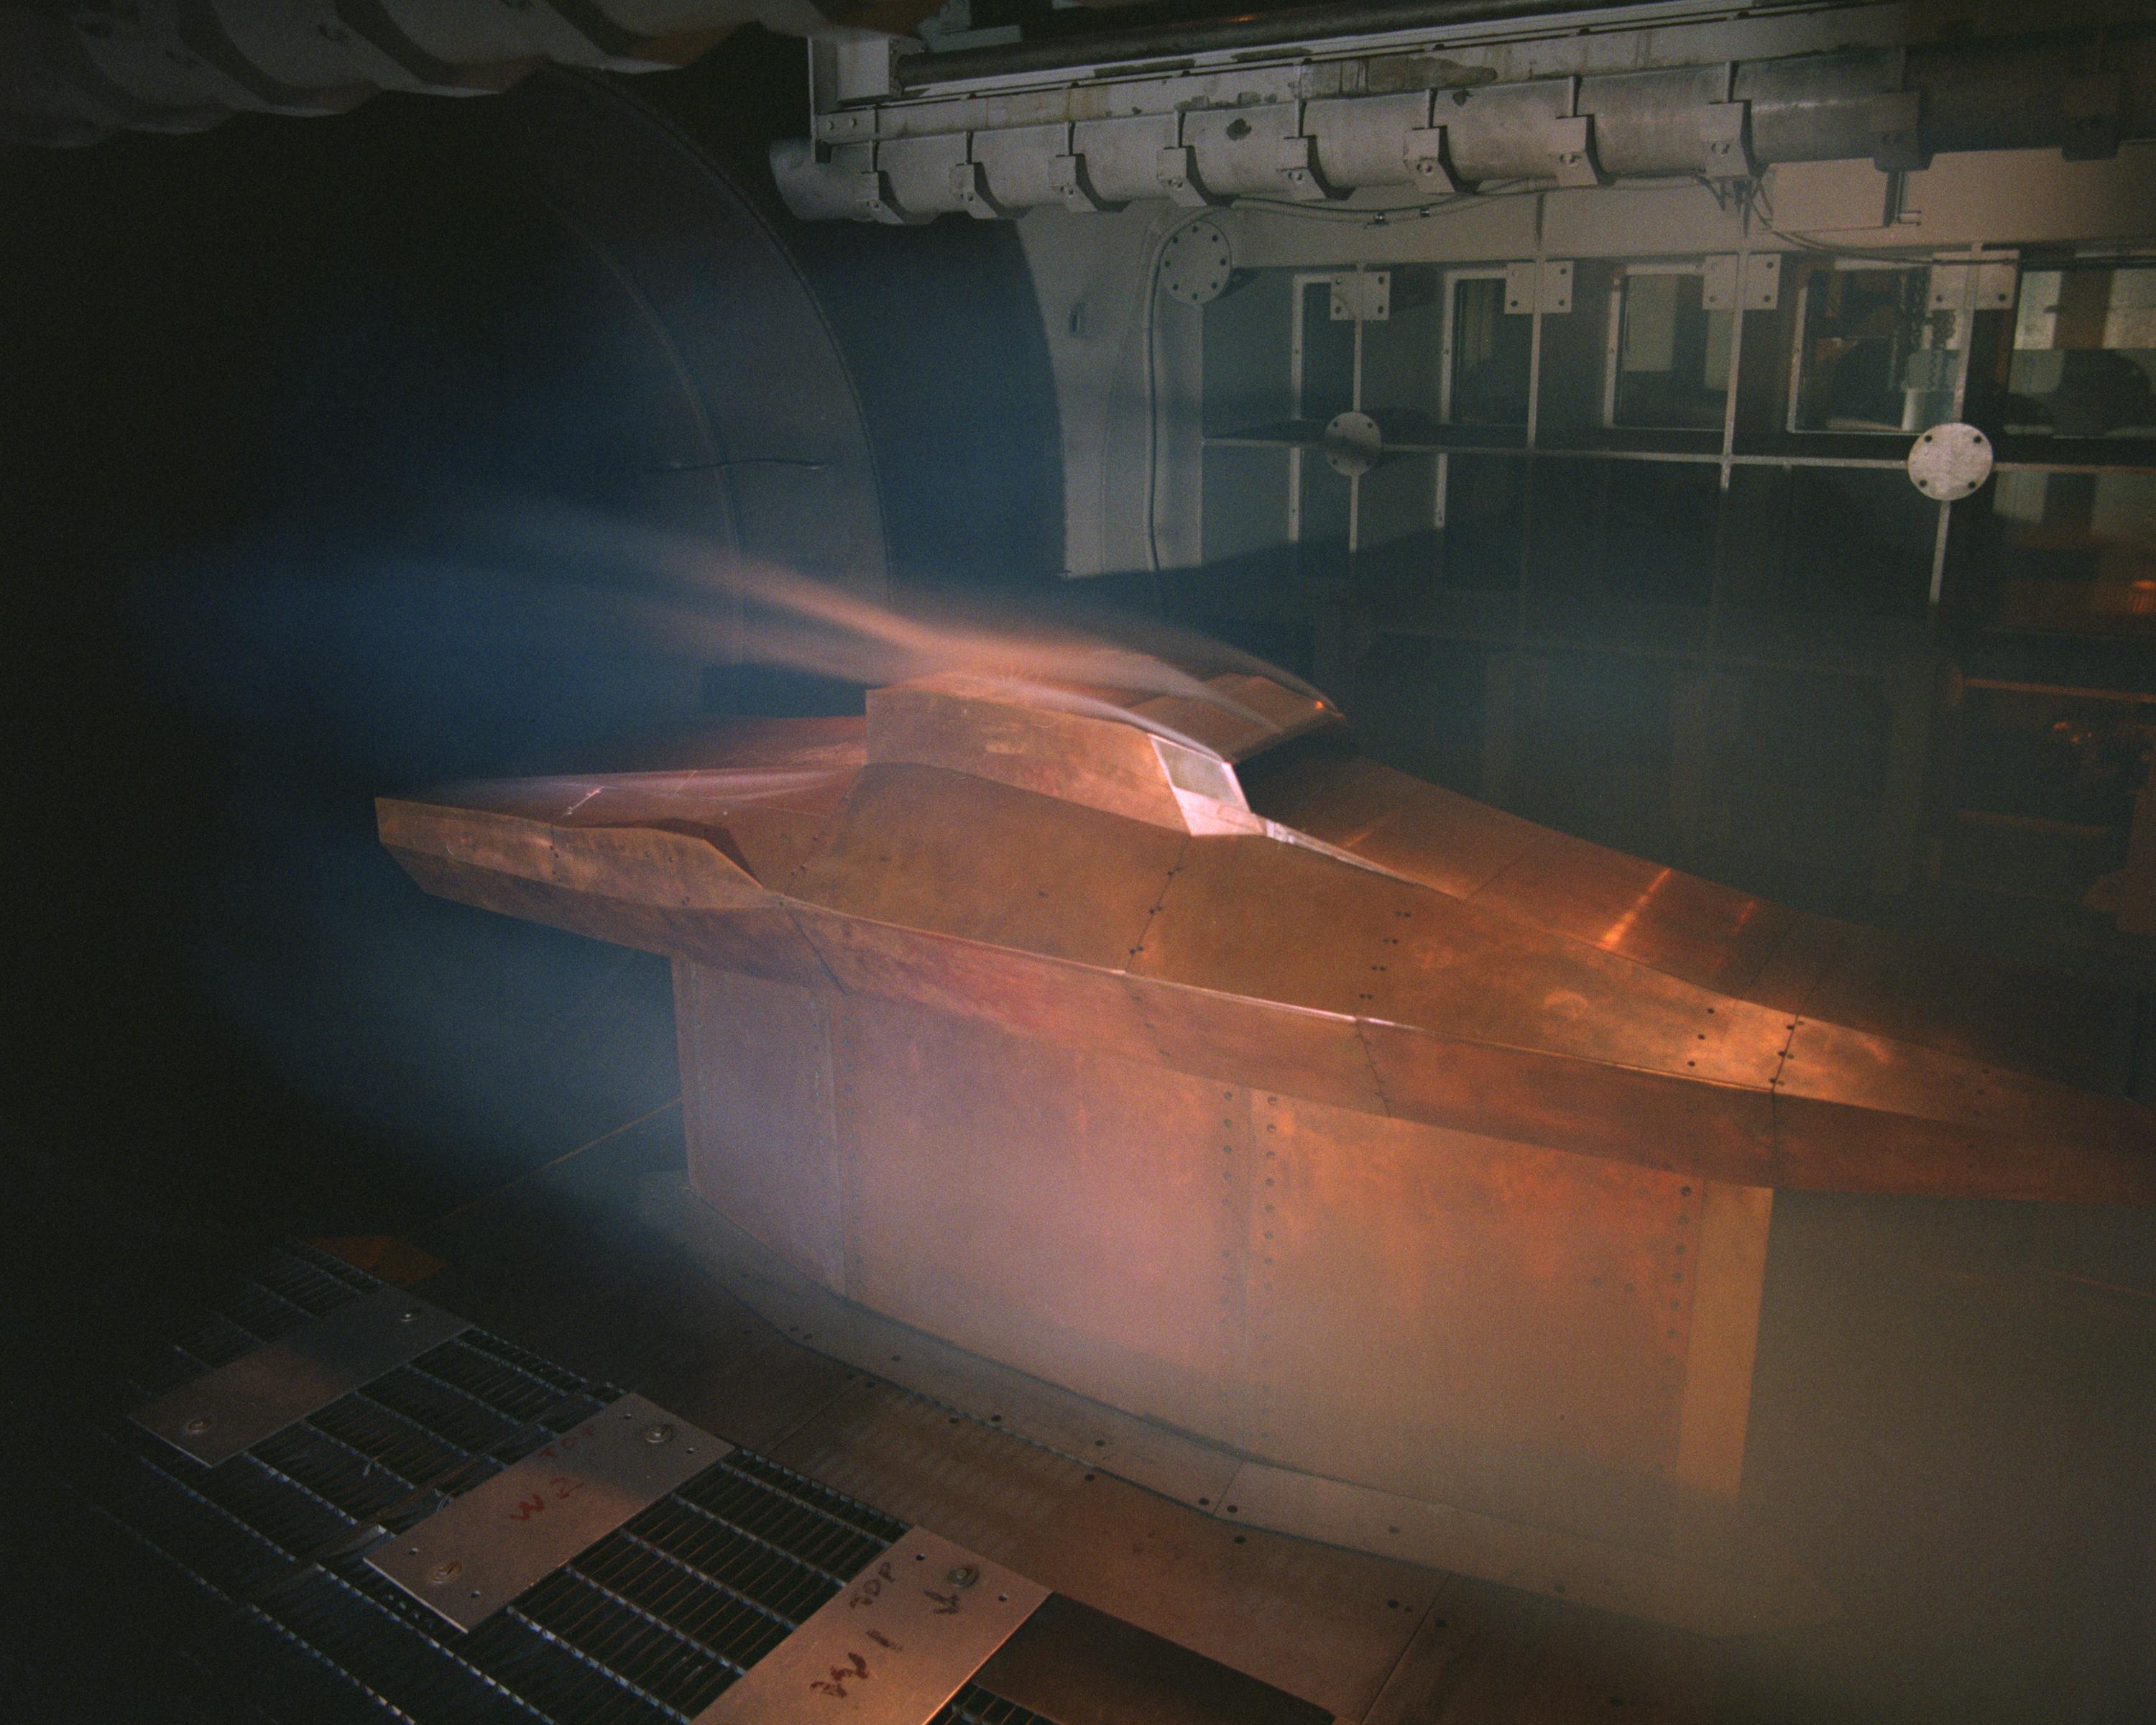 A scale model of a hypersonic flight vehicle lays upside down in a wind tunnel facility.